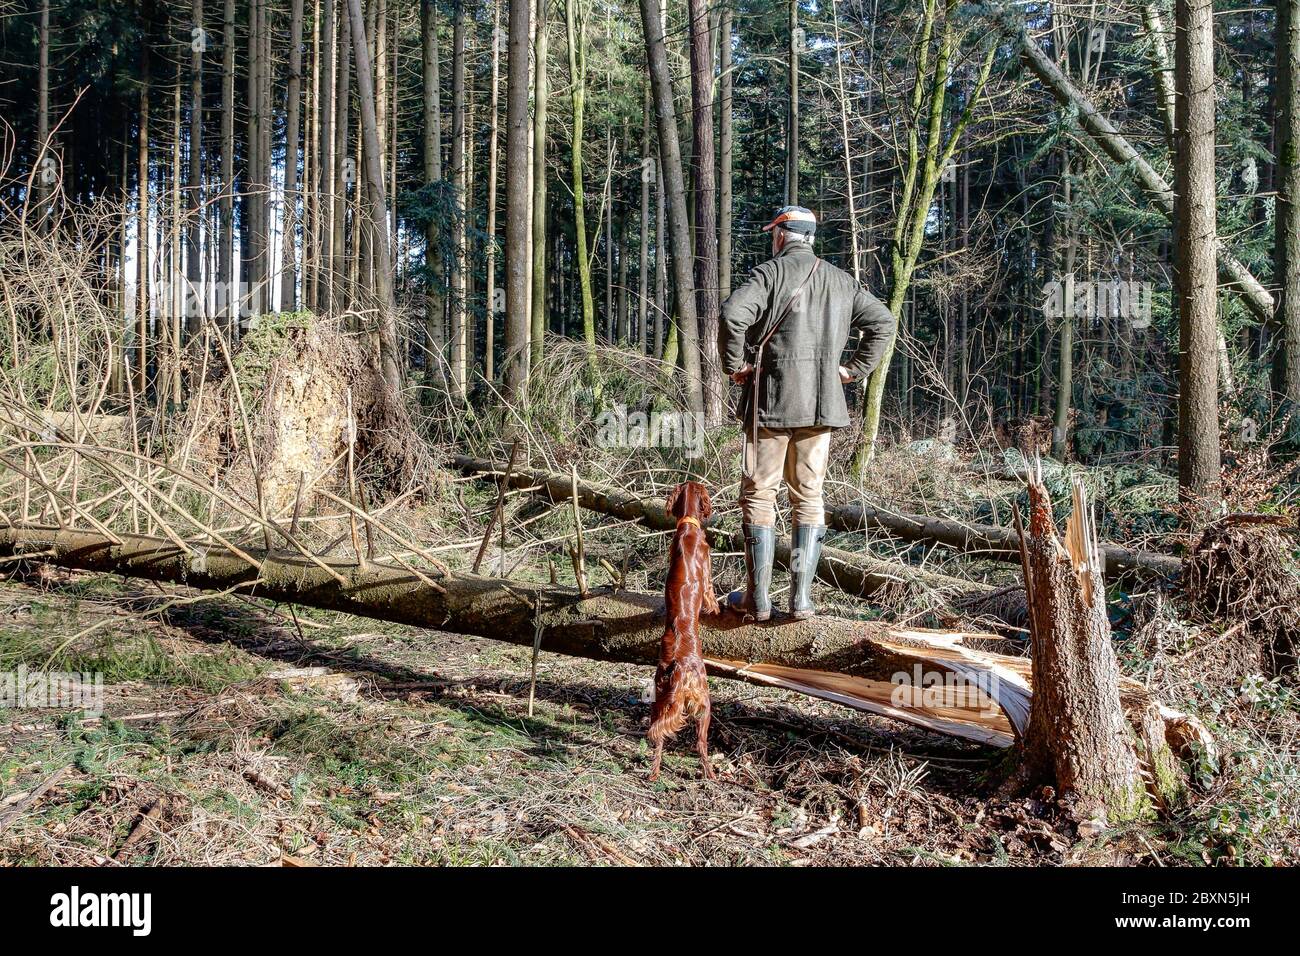 A forester stands on a fallen tree trunk and examines the damage that the storm caused in the forest. Climate change threatens Europe's forests. Stock Photo